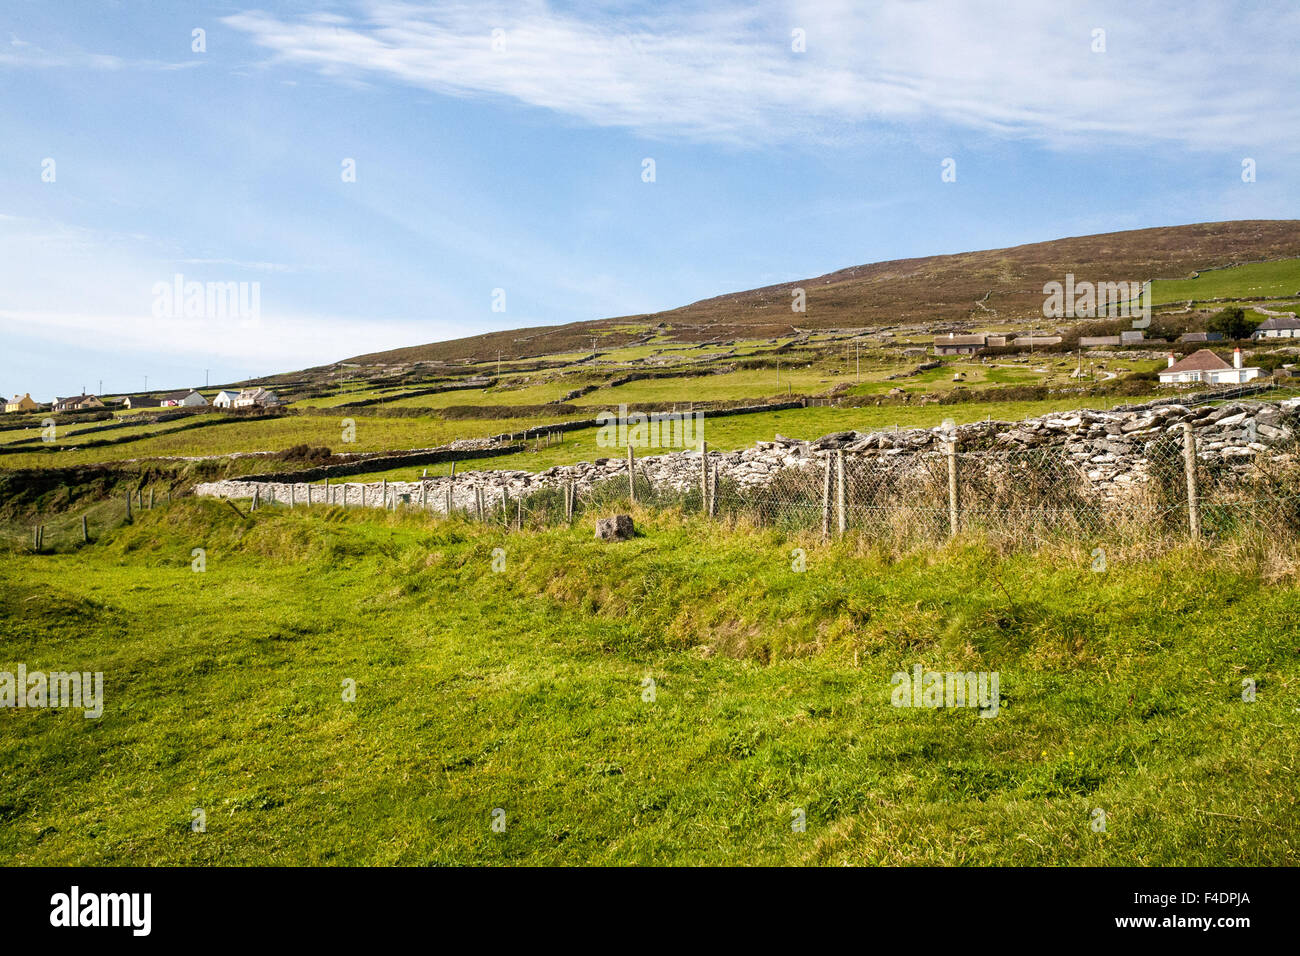 Lush green hills, stone wall and fenced pasture land of Ireland, green scenic farmland under a blue sky. Stock Photo